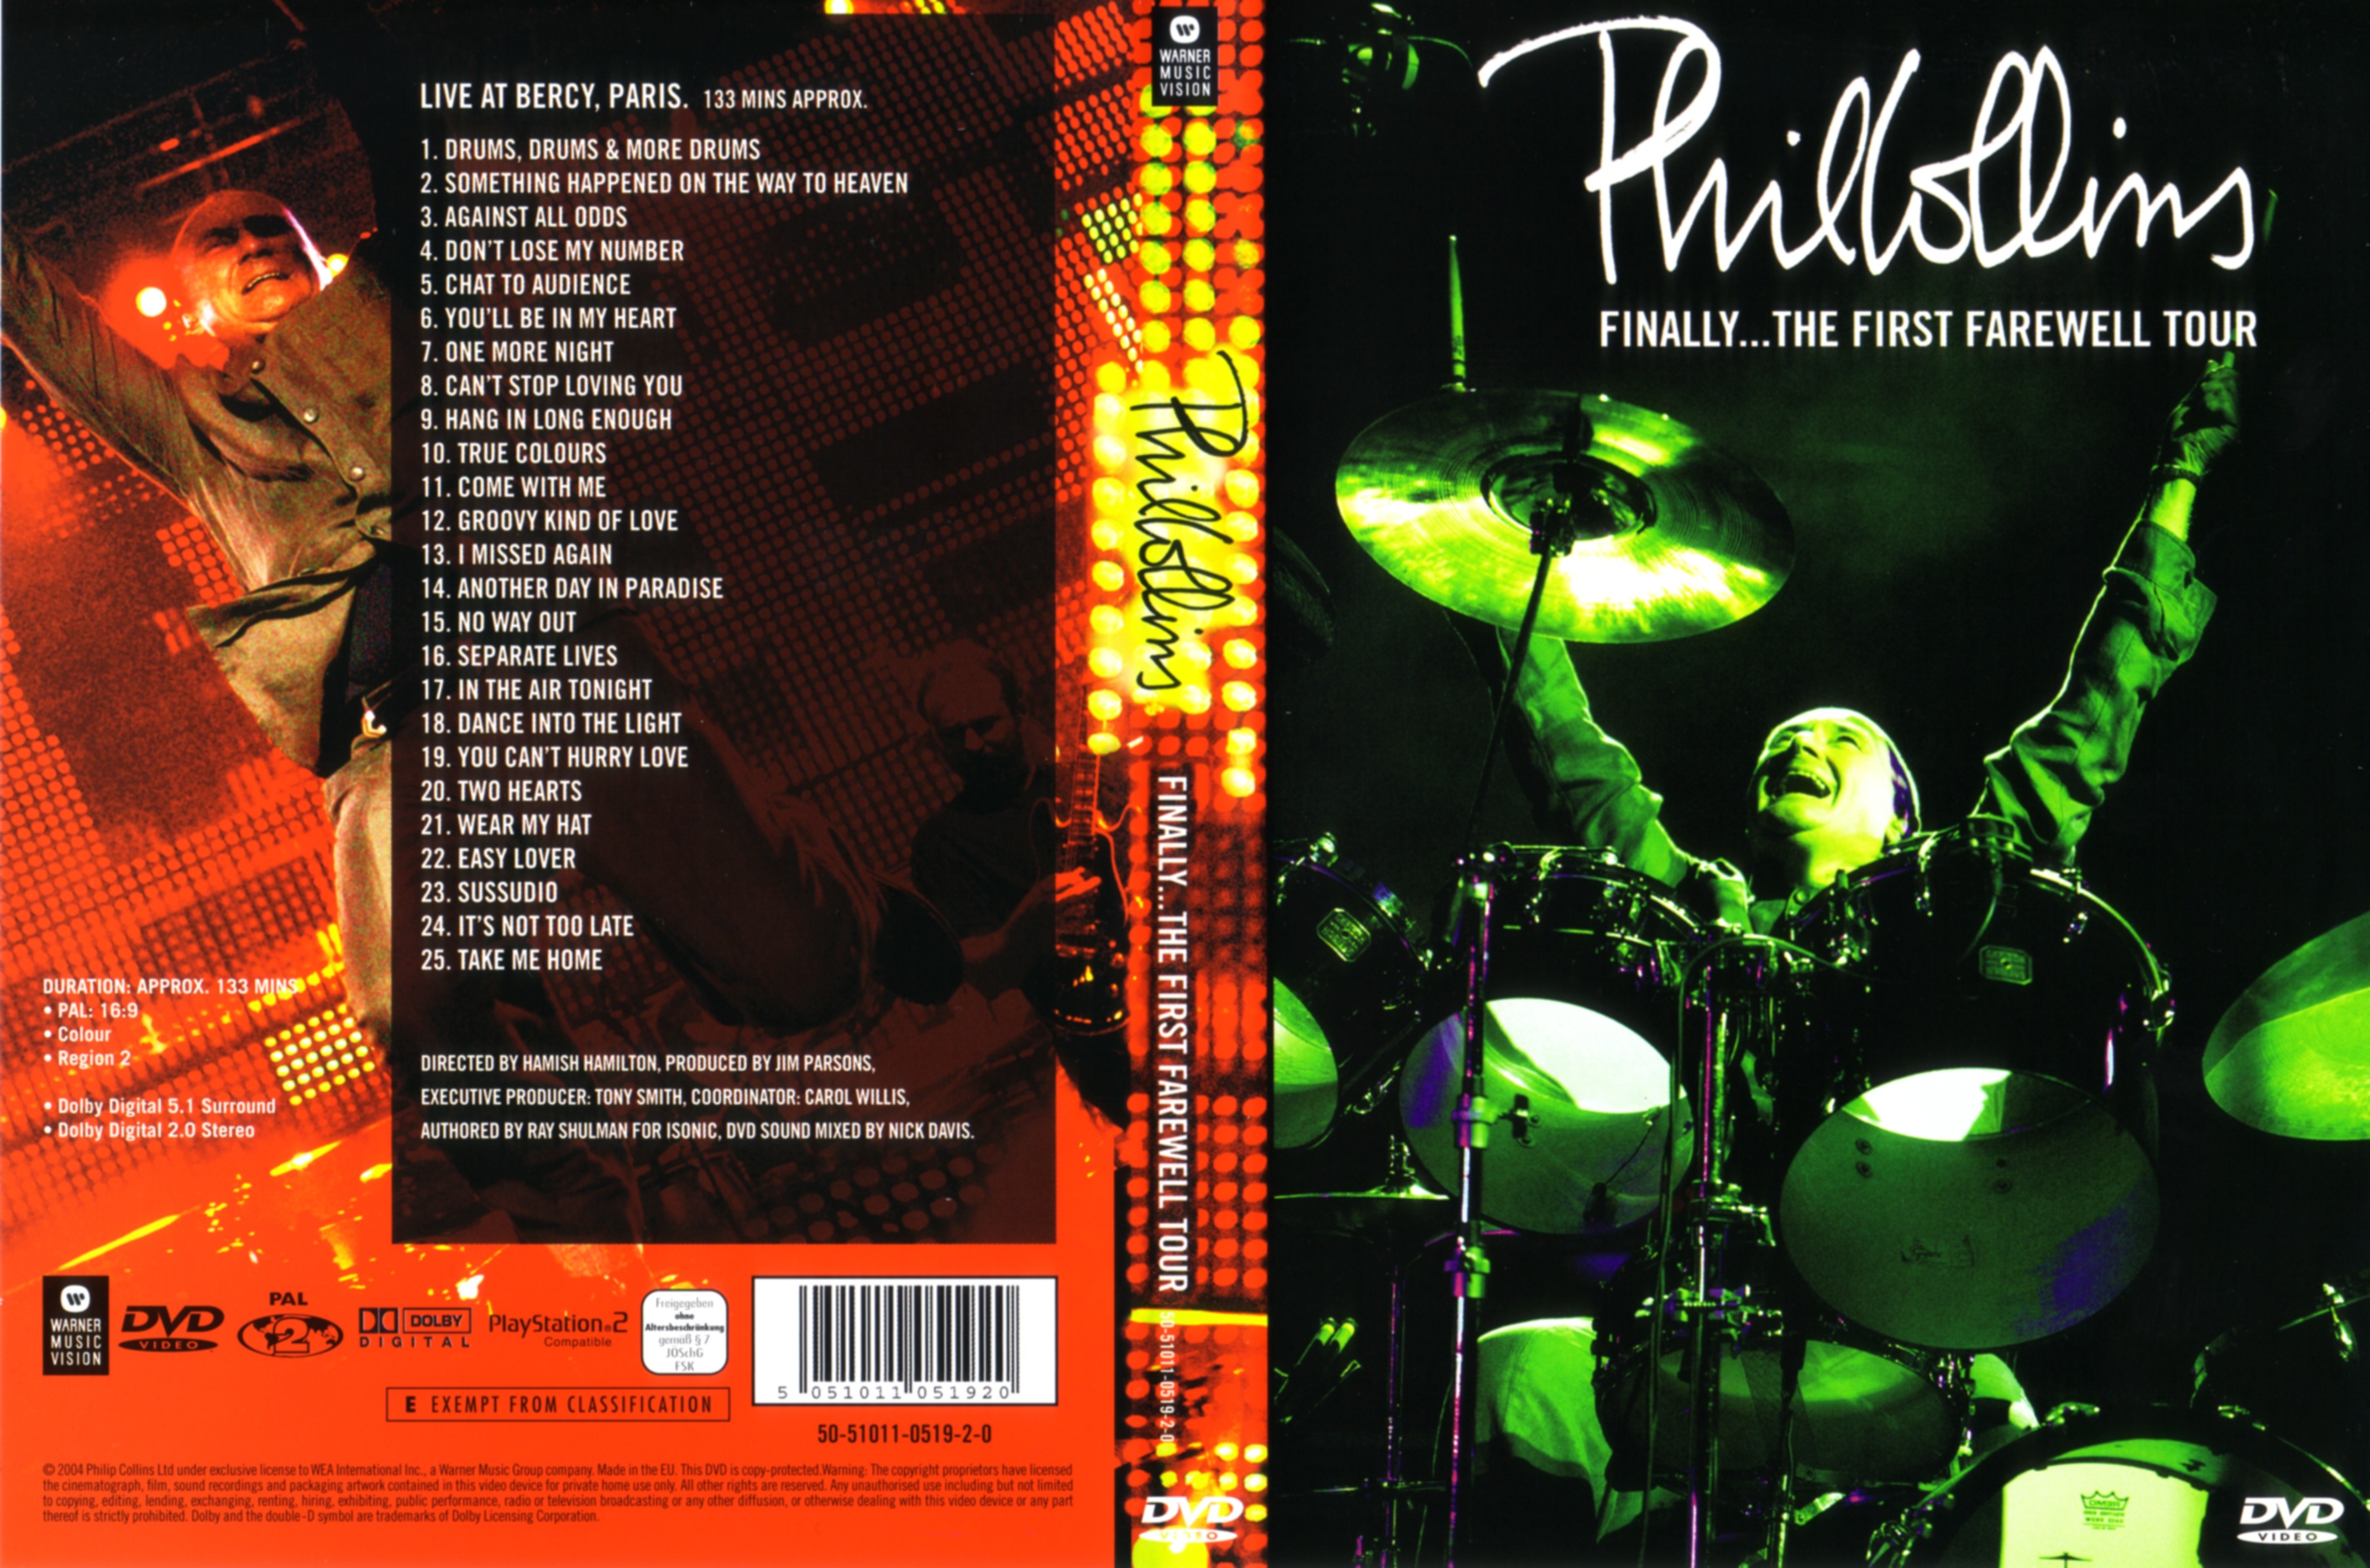 Jaquette DVD Phil Collins Finally The First Farewell Tour